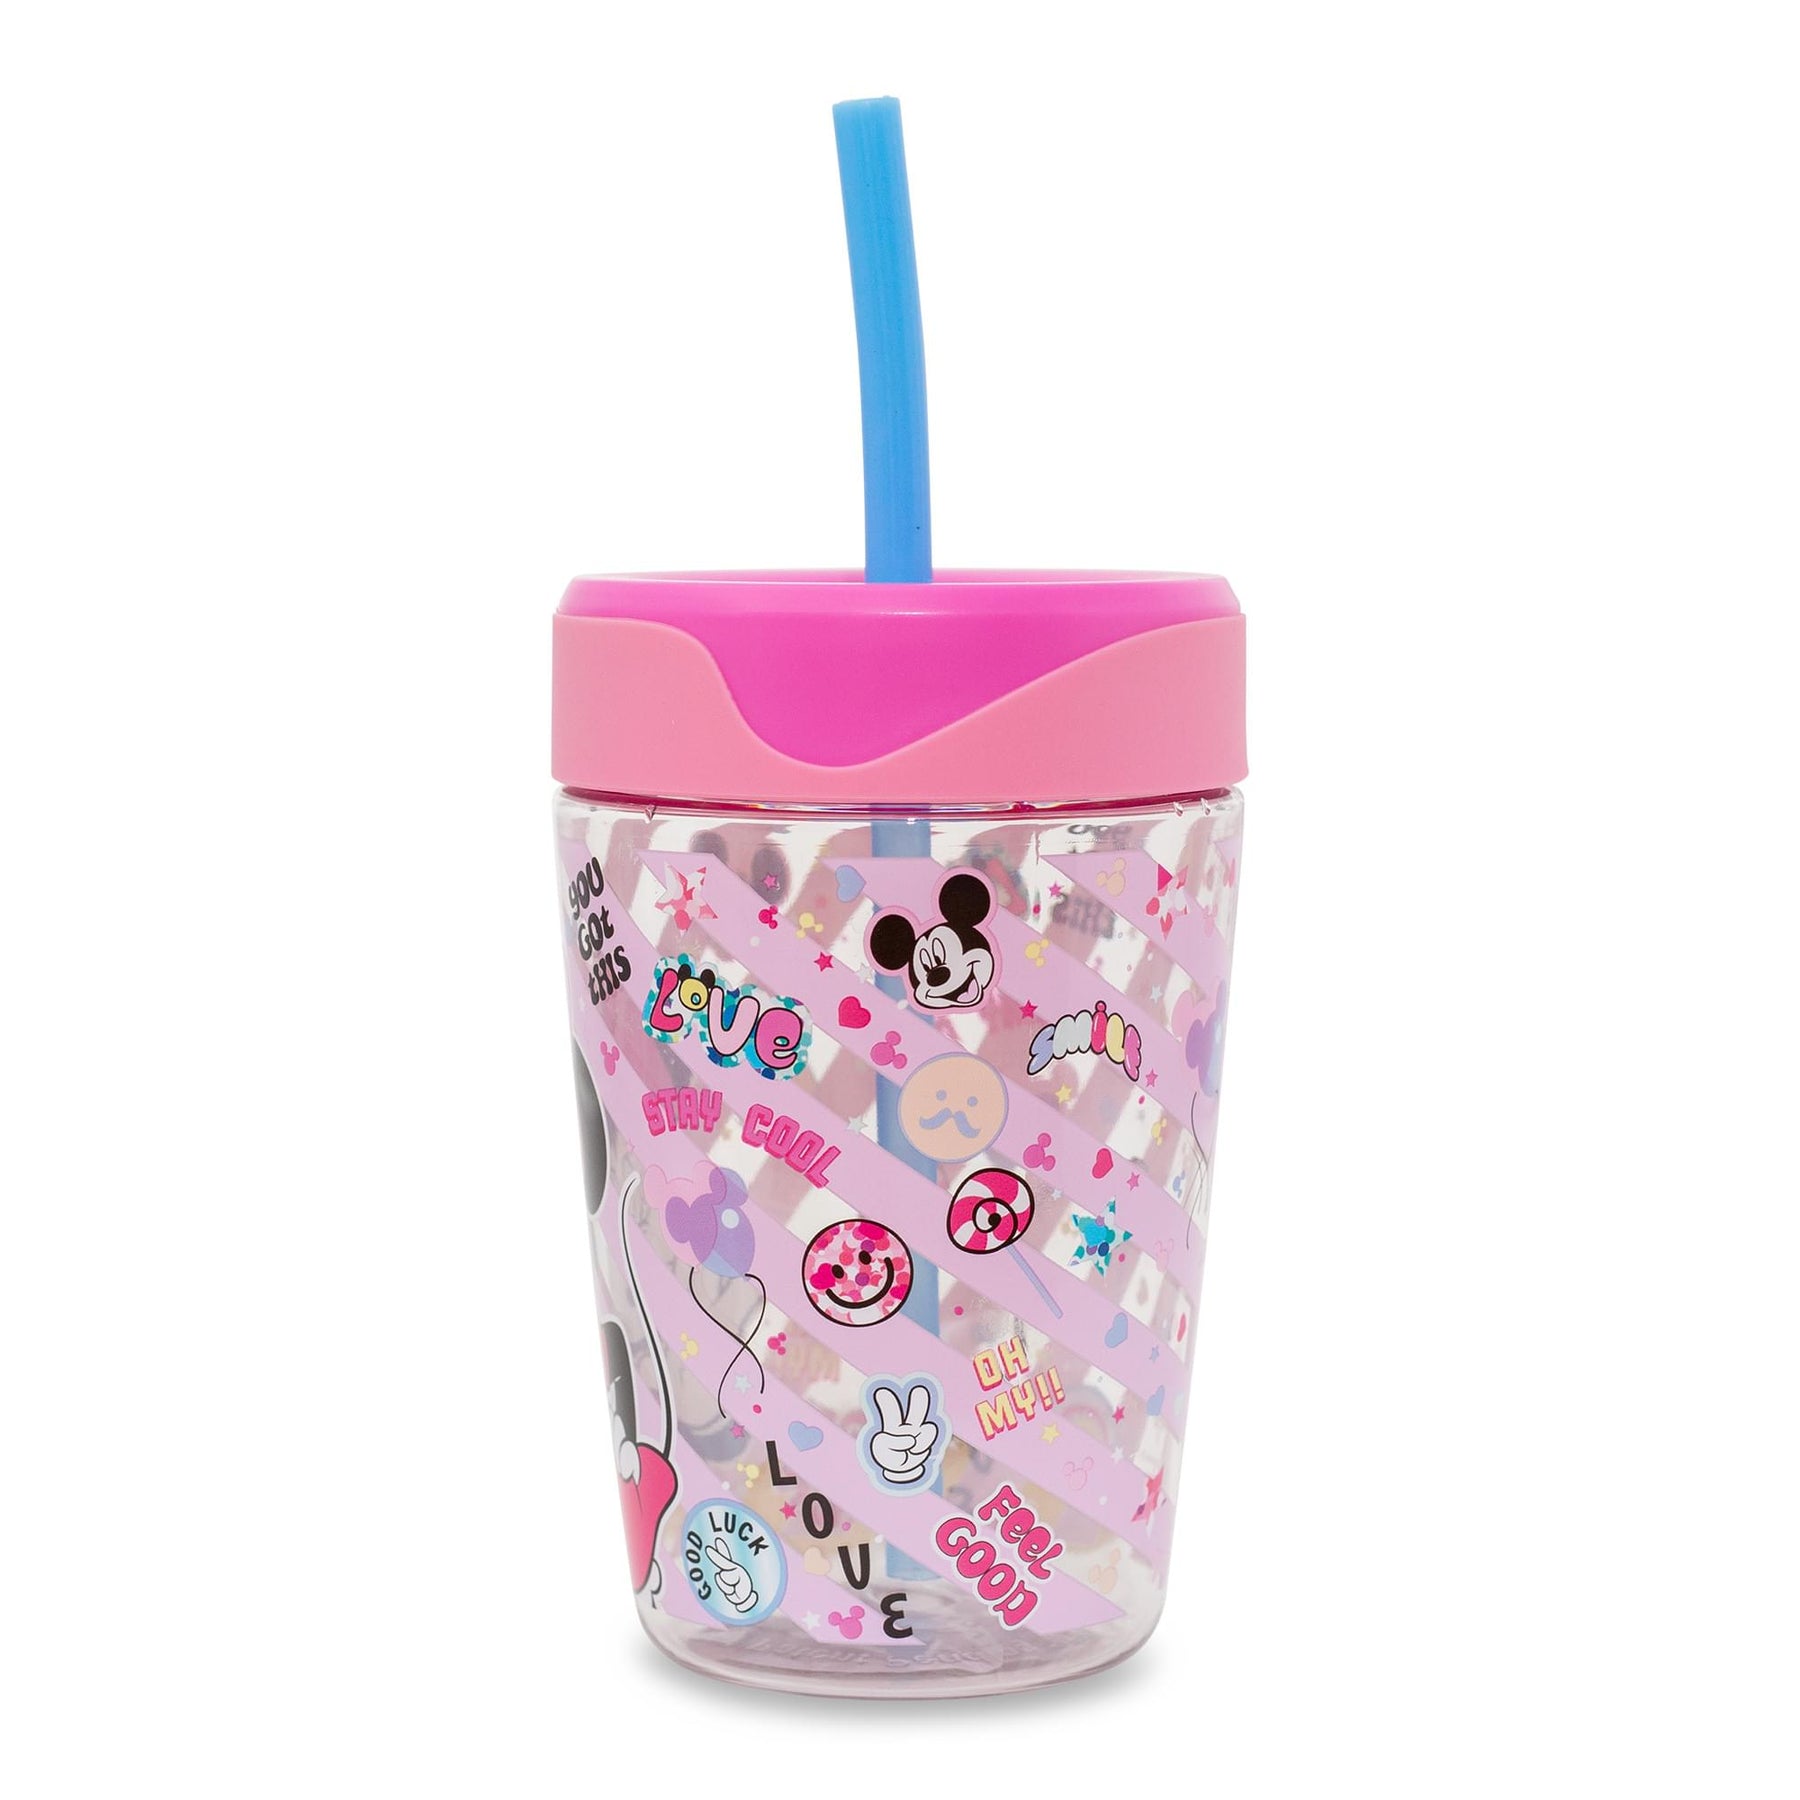 Disney Minnie Mouse Kids Spill-Proof Tumbler With Straw | Holds 18 Ounces